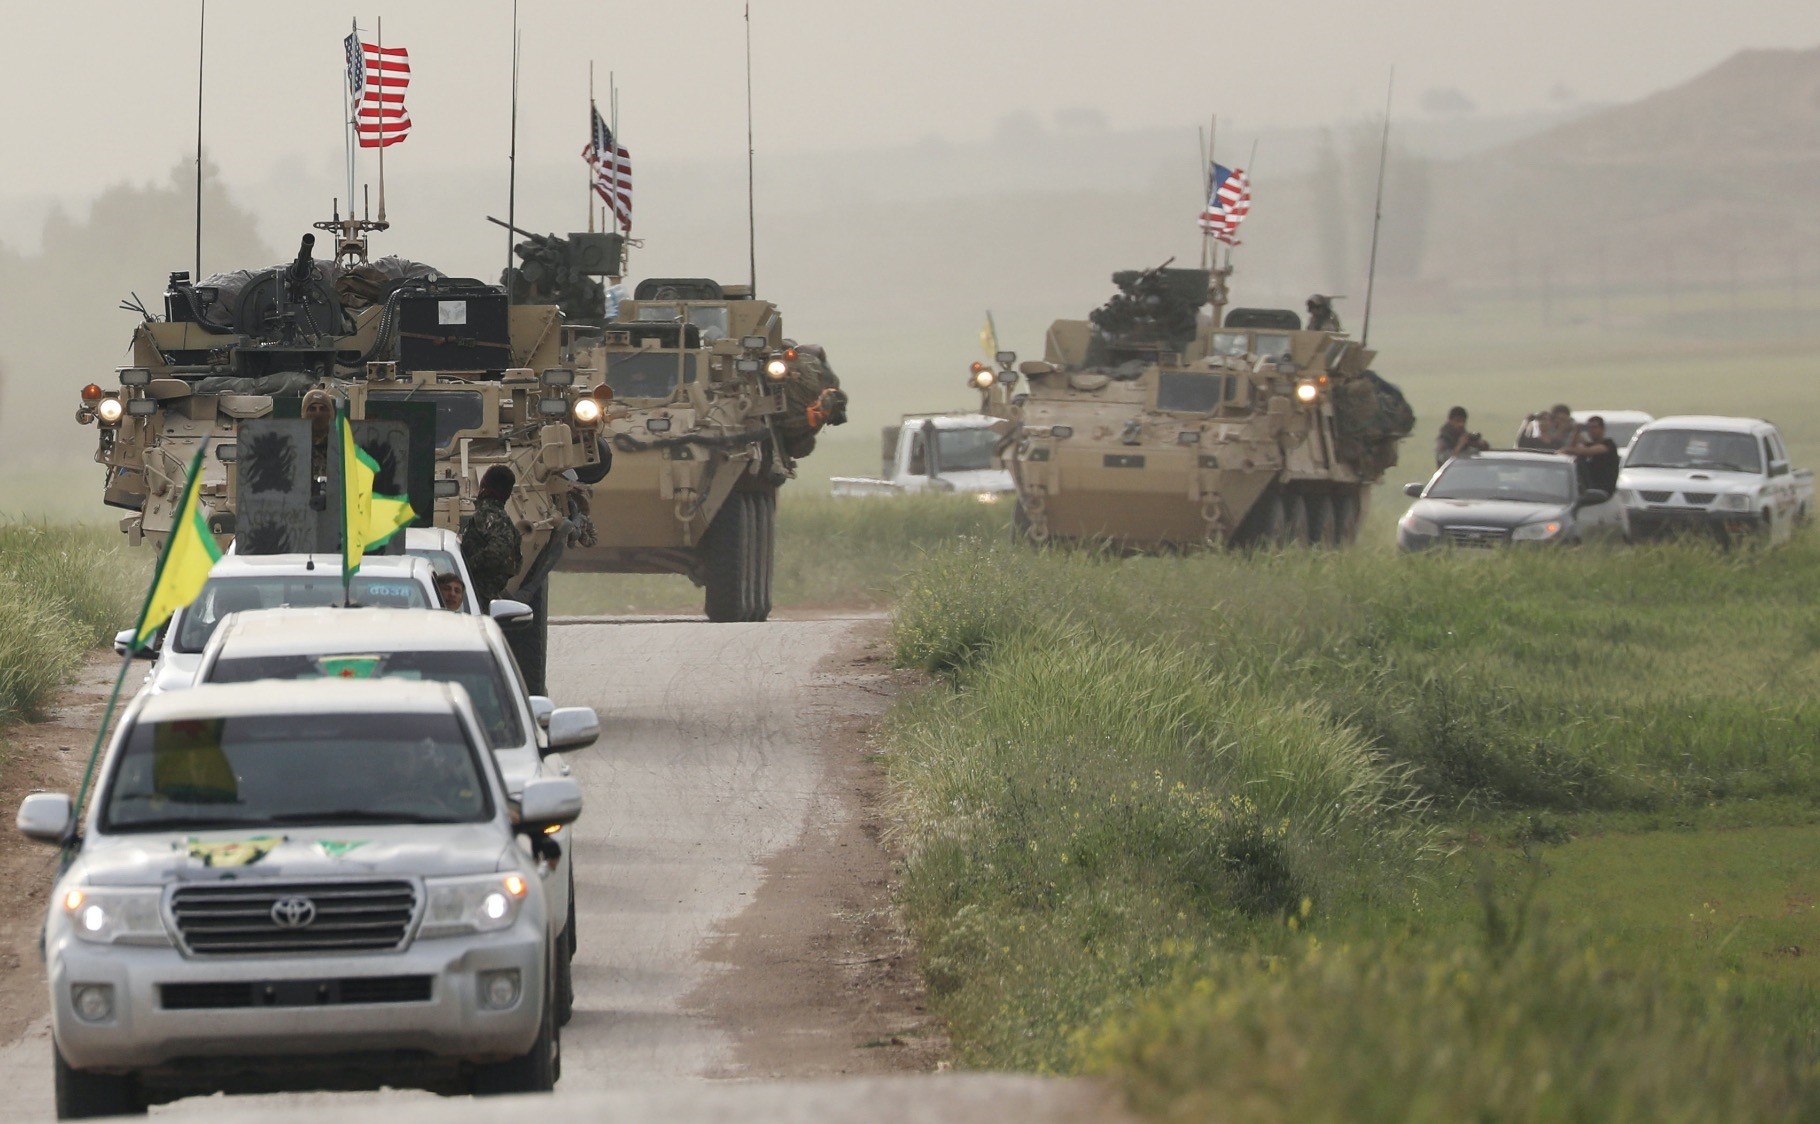 YPG terrorists head a convoy of U.S. military vehicles in the town of Al-Darbasiyah next to the Turkish border, April 28, 2017.